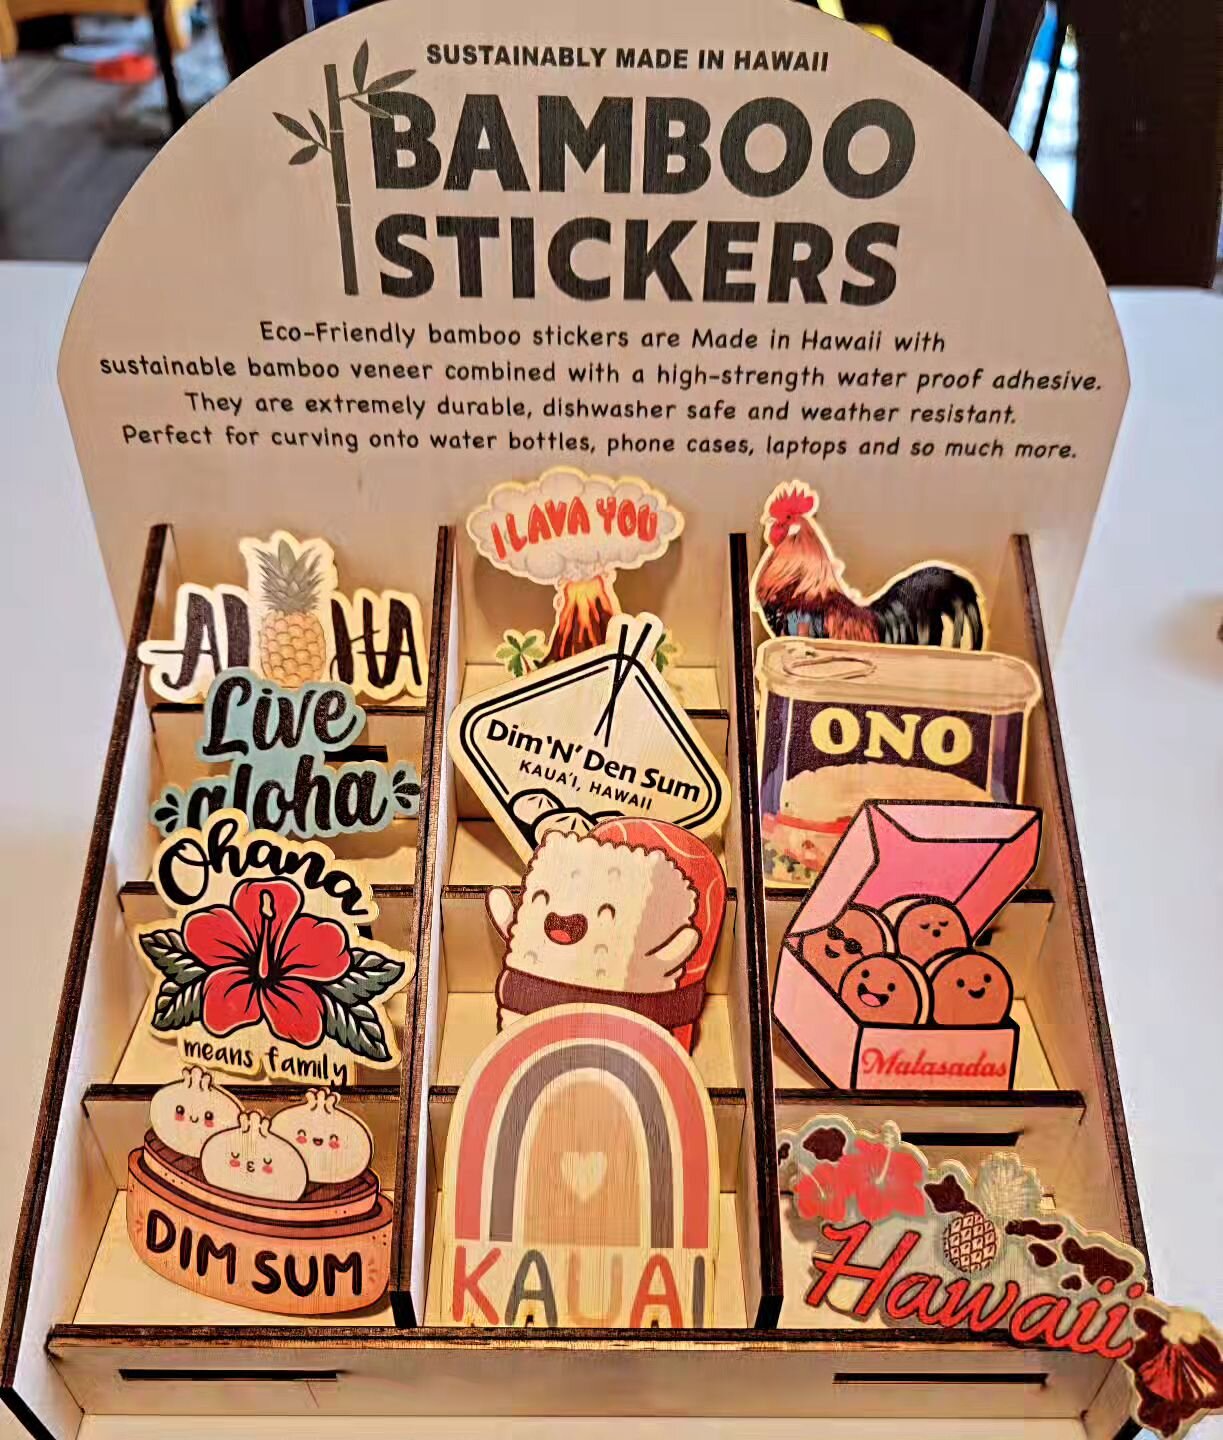 New stickers from @bamboowoodstickers available at the food truck or message us to have them mailed to you.
We'll re-open tomorrow 4/5 11-3pm and our regular schedule next week Tuesday - Friday 11-3pm
Menu on our website DimNDenSum.com
Call/Text Your